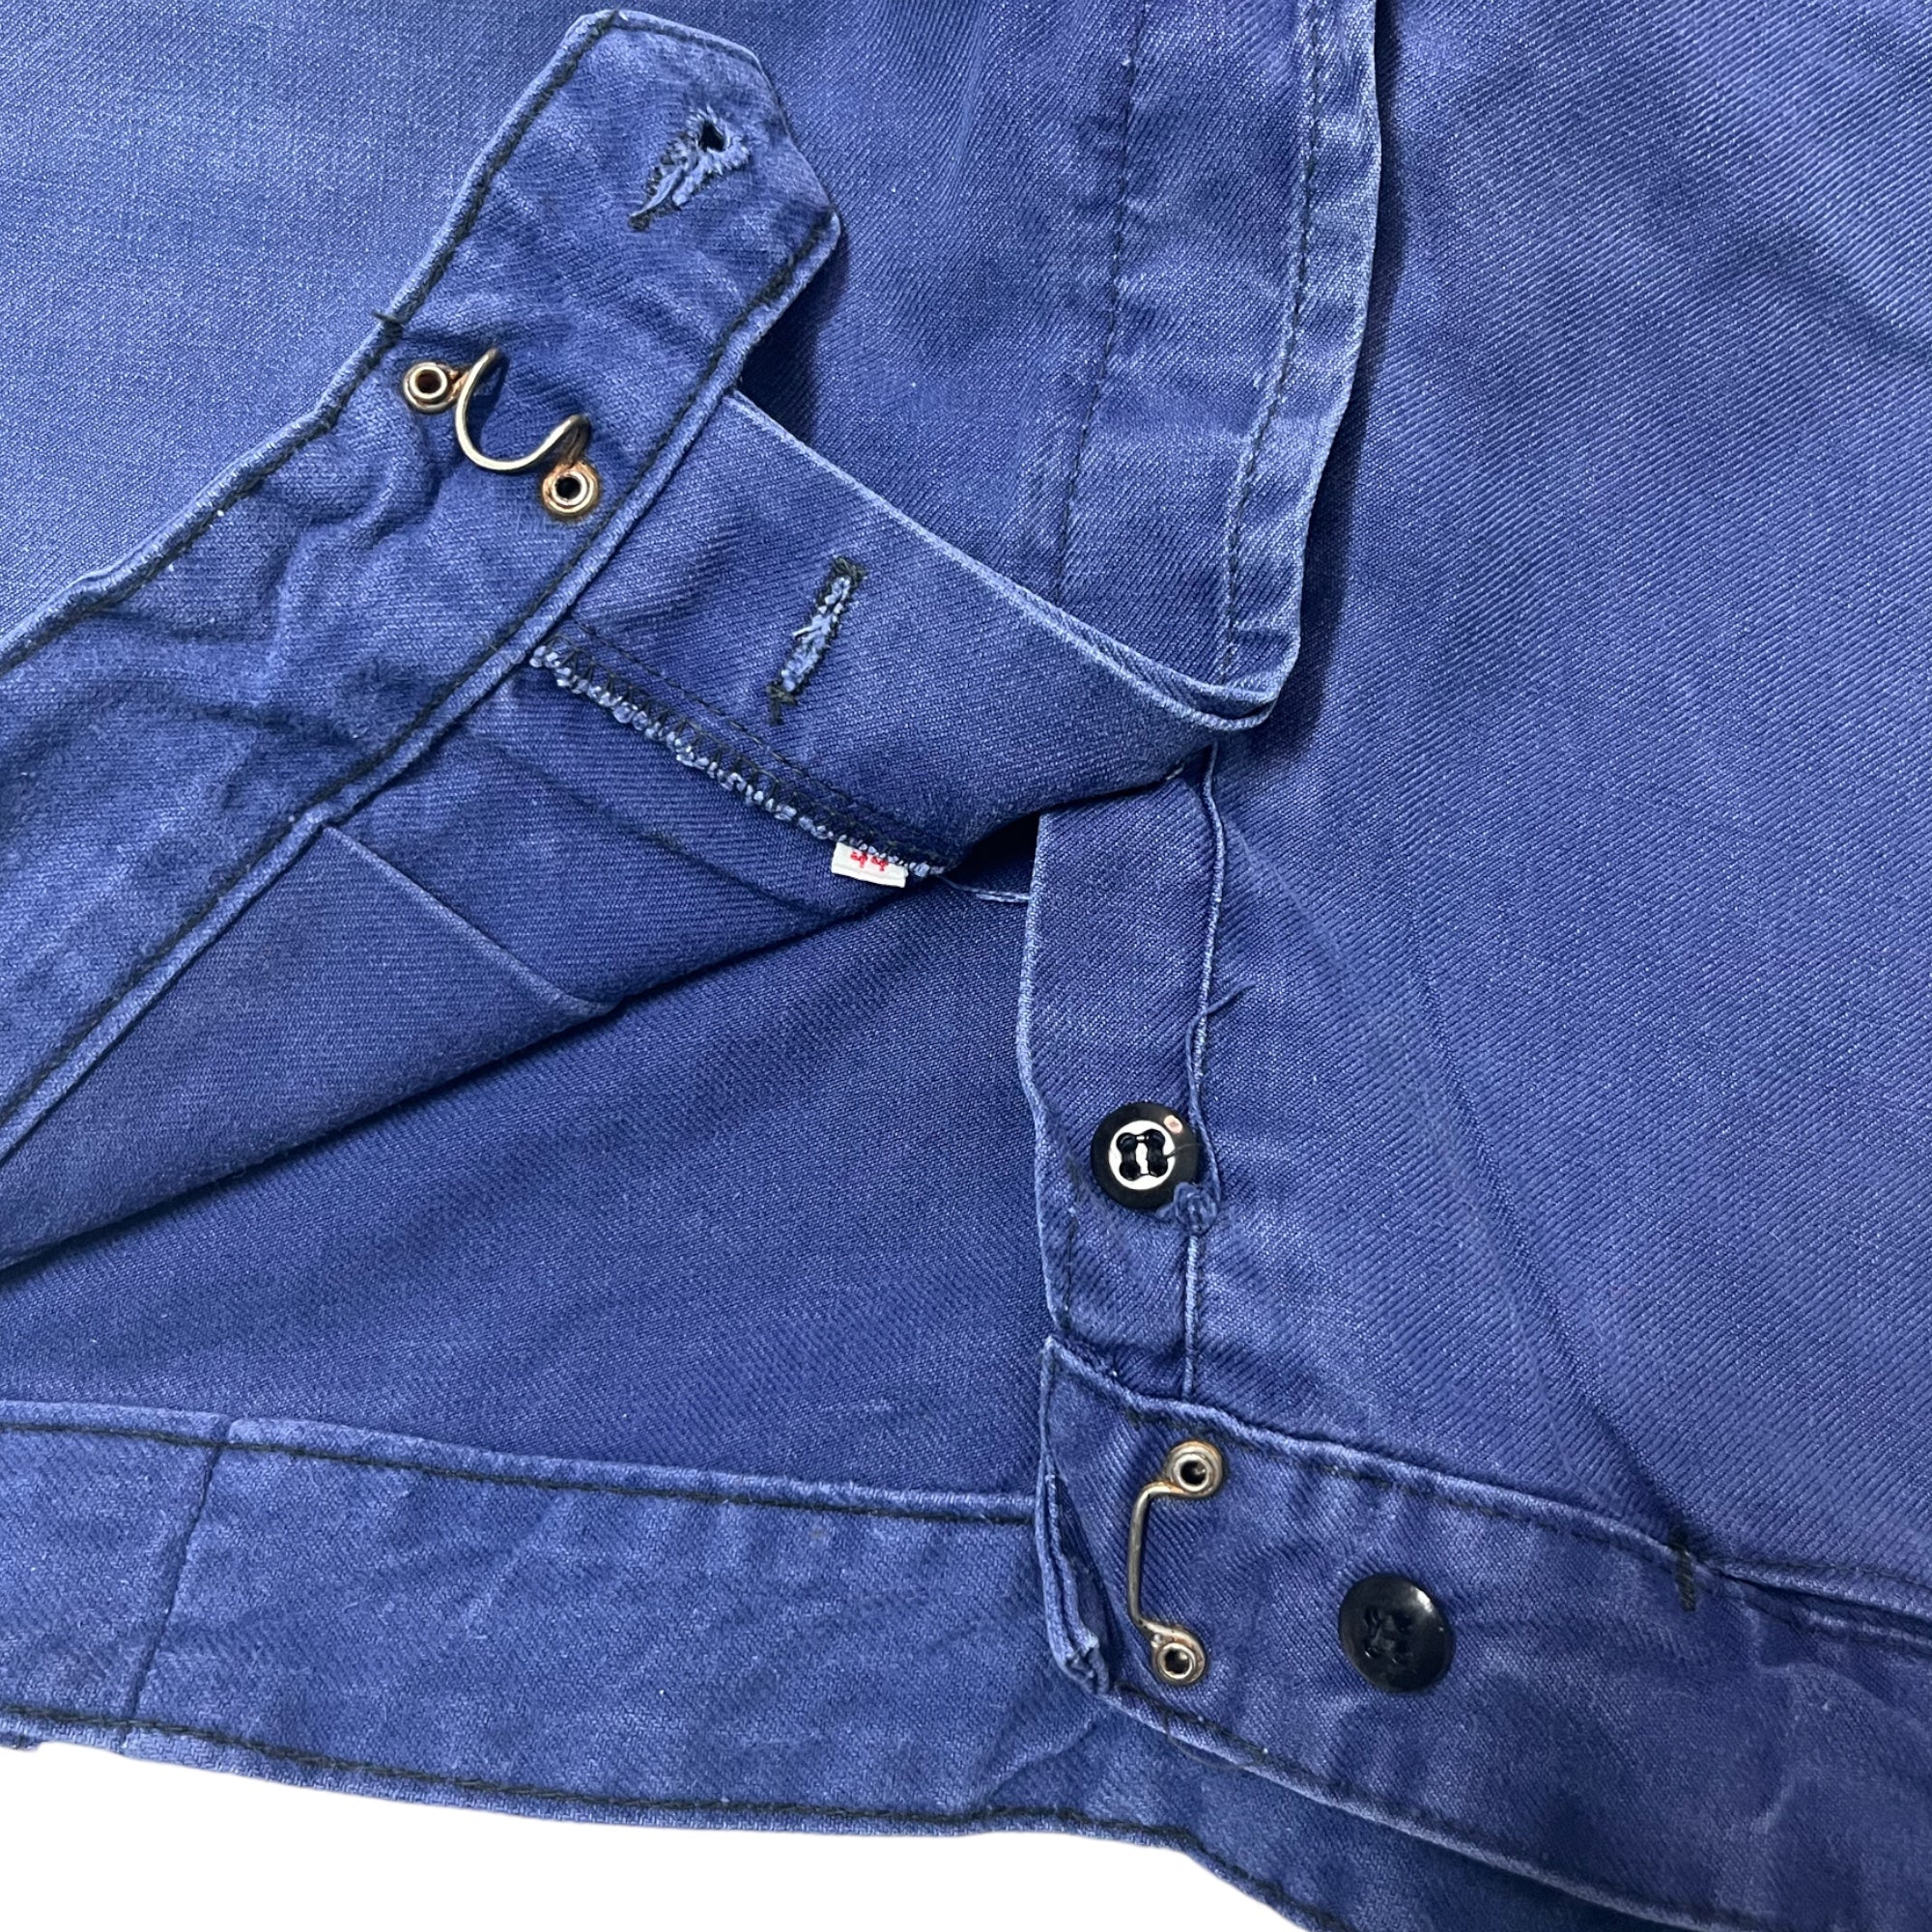 60s Adolph Lafont French Workwear Cotton Work Shorts with Hook Closure - Indigo Blue - 32”